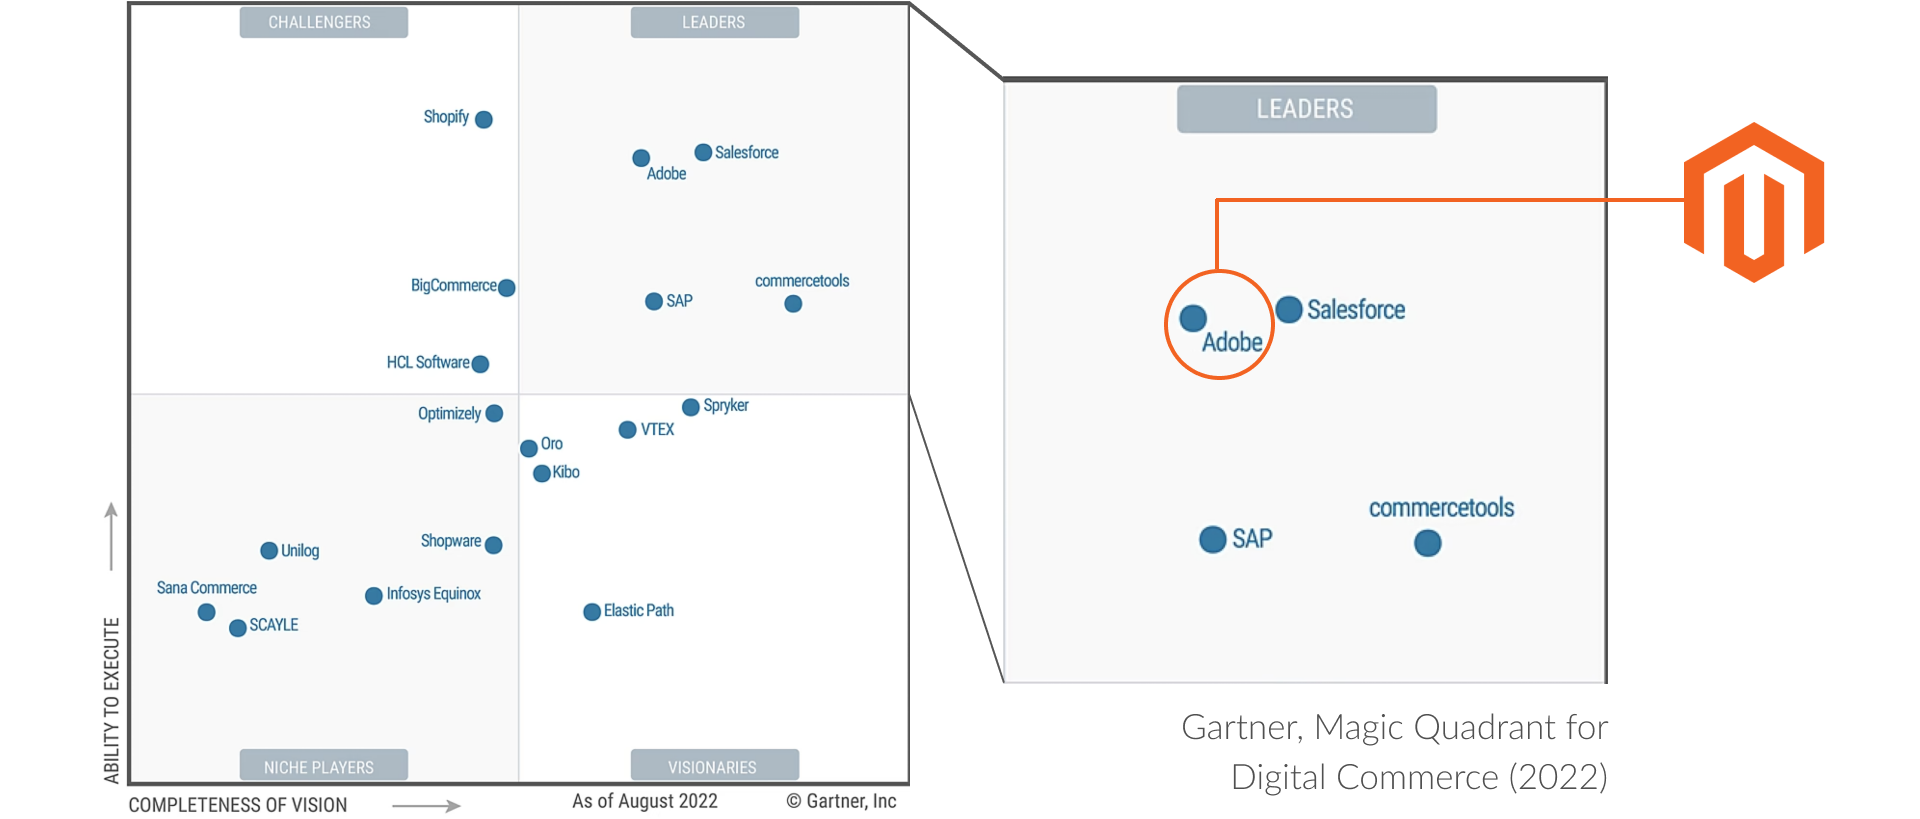 In 2022, Adobe Magento was named a Leader in the Gartner® Magic Quadrant™ for Digital Commerce report.